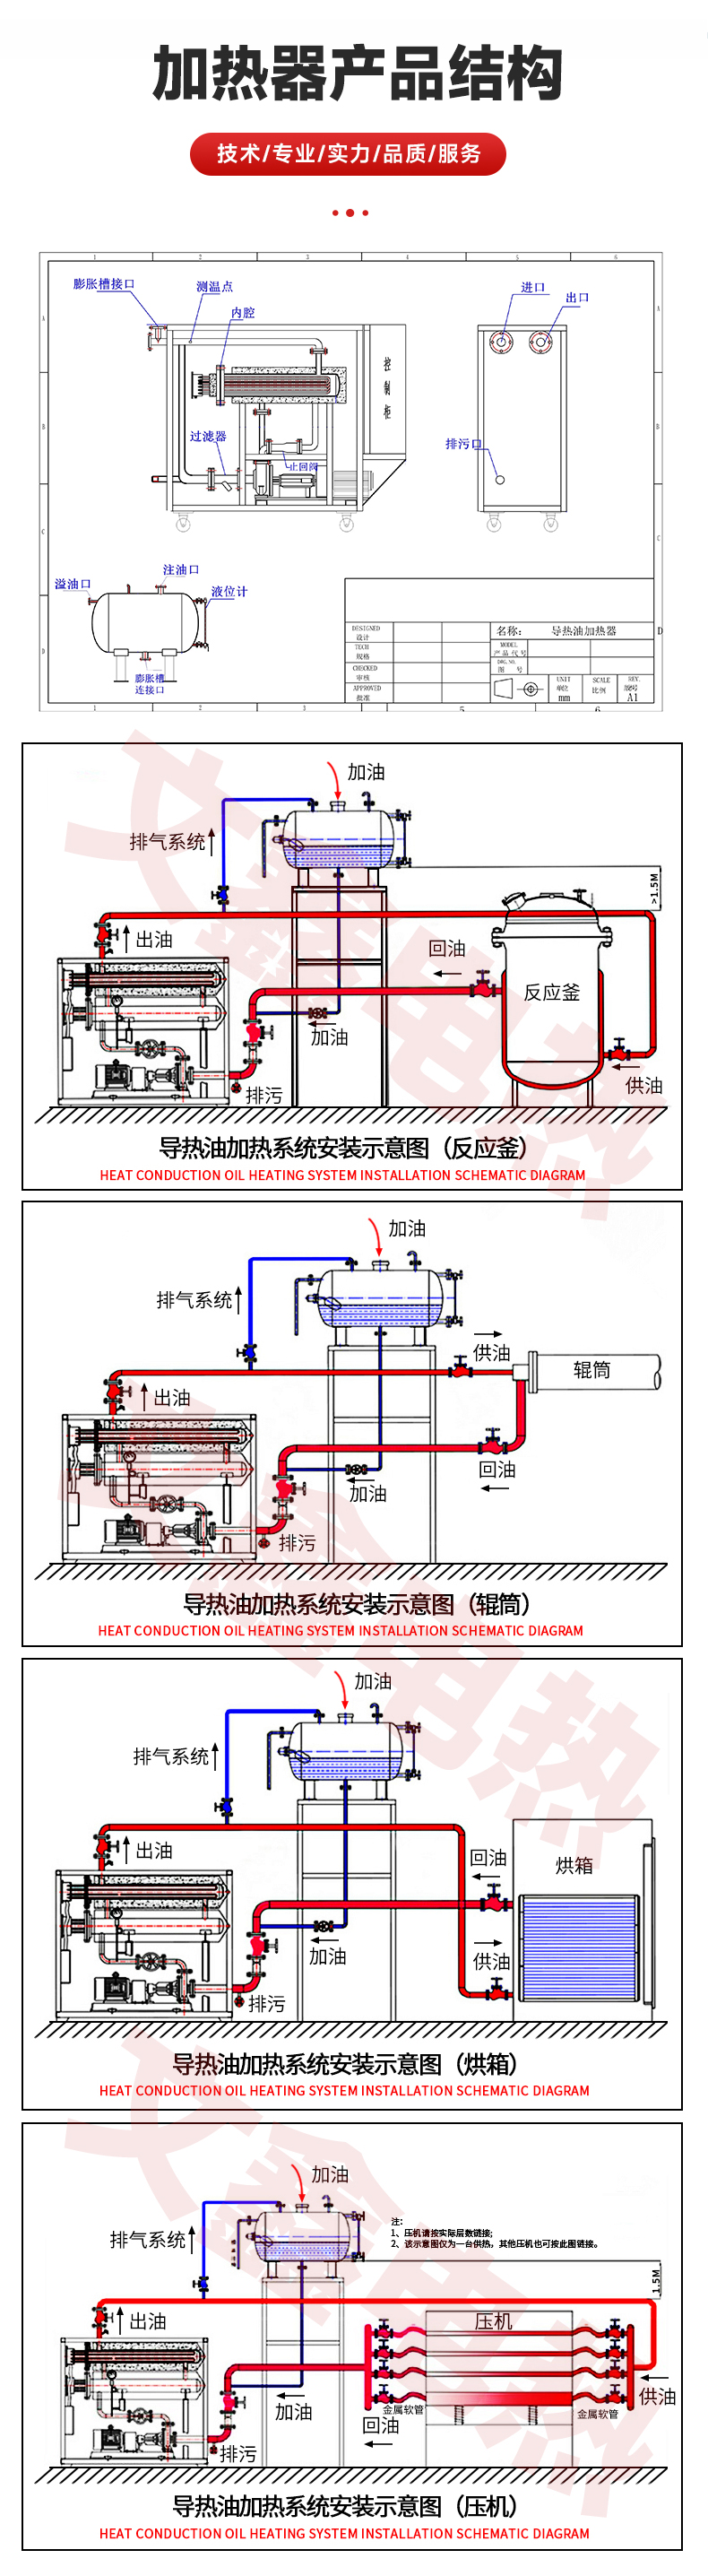 Heat conduction oil furnace heater, constant temperature hot press, calender supporting circulating electric heater